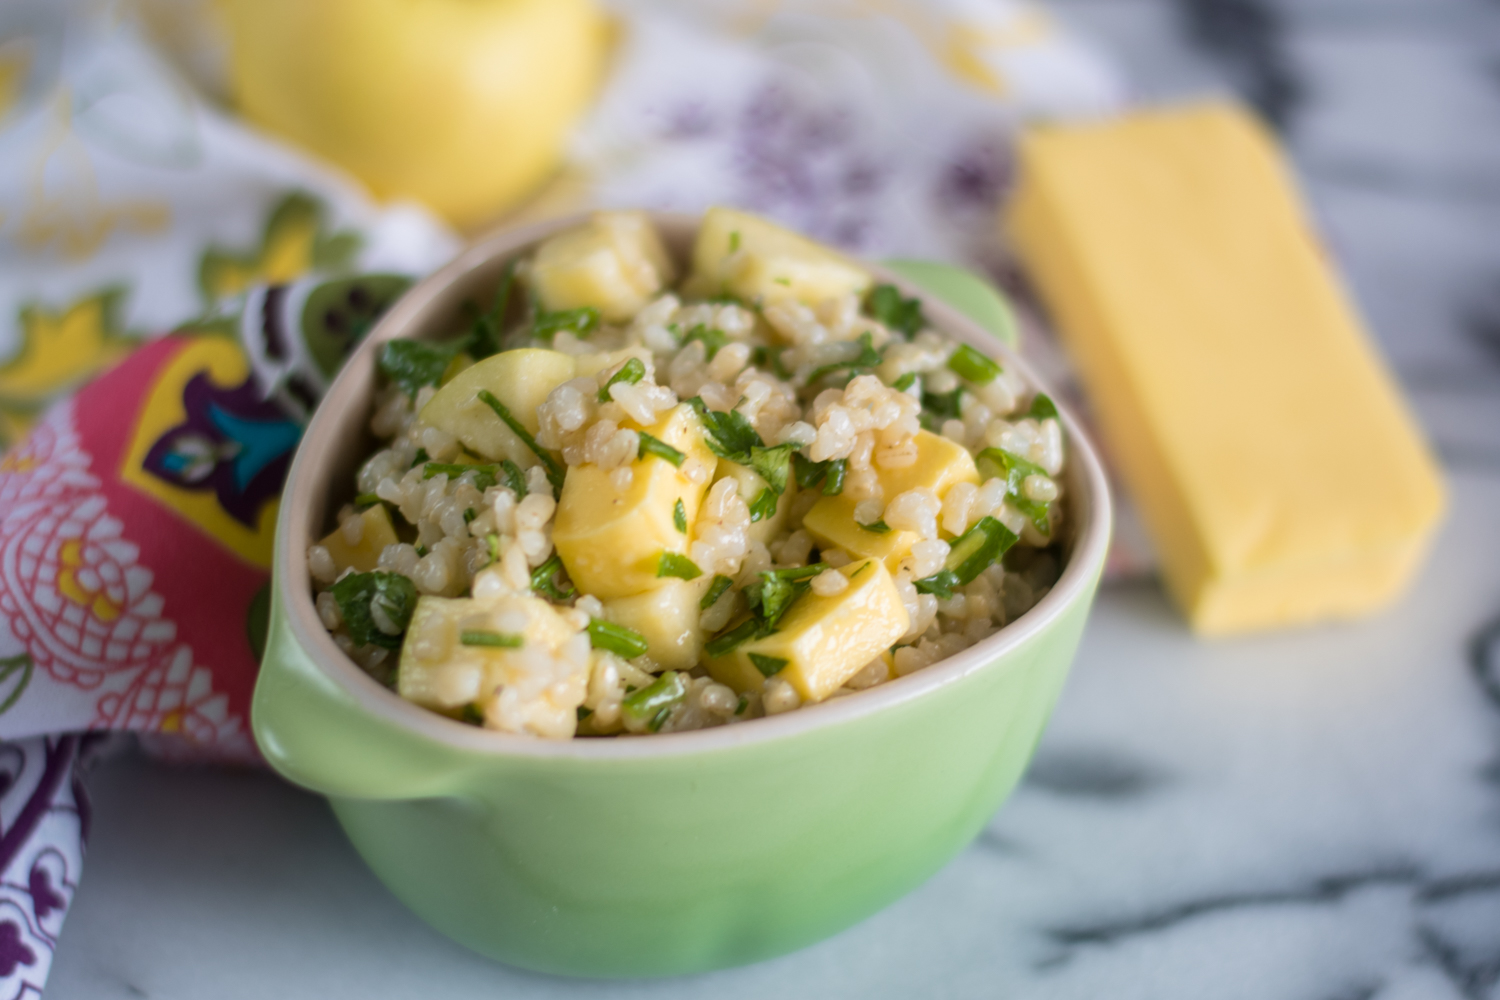 Vegan Cheddar, Apple and Brown Rice Salad is a filling, flavorful vegan meal! 